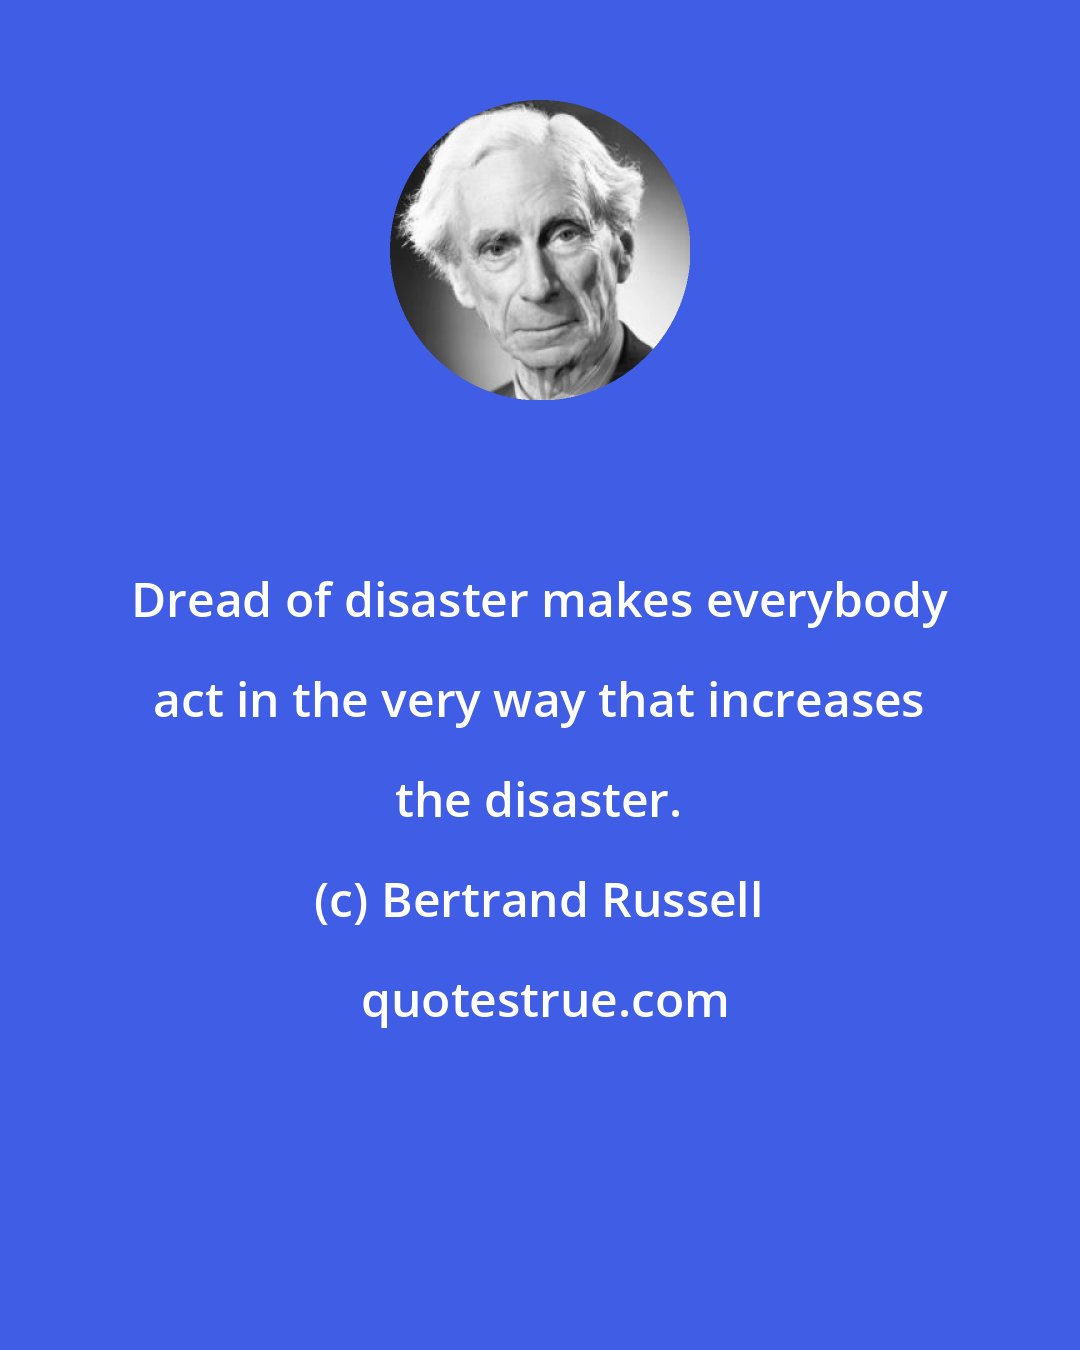 Bertrand Russell: Dread of disaster makes everybody act in the very way that increases the disaster.